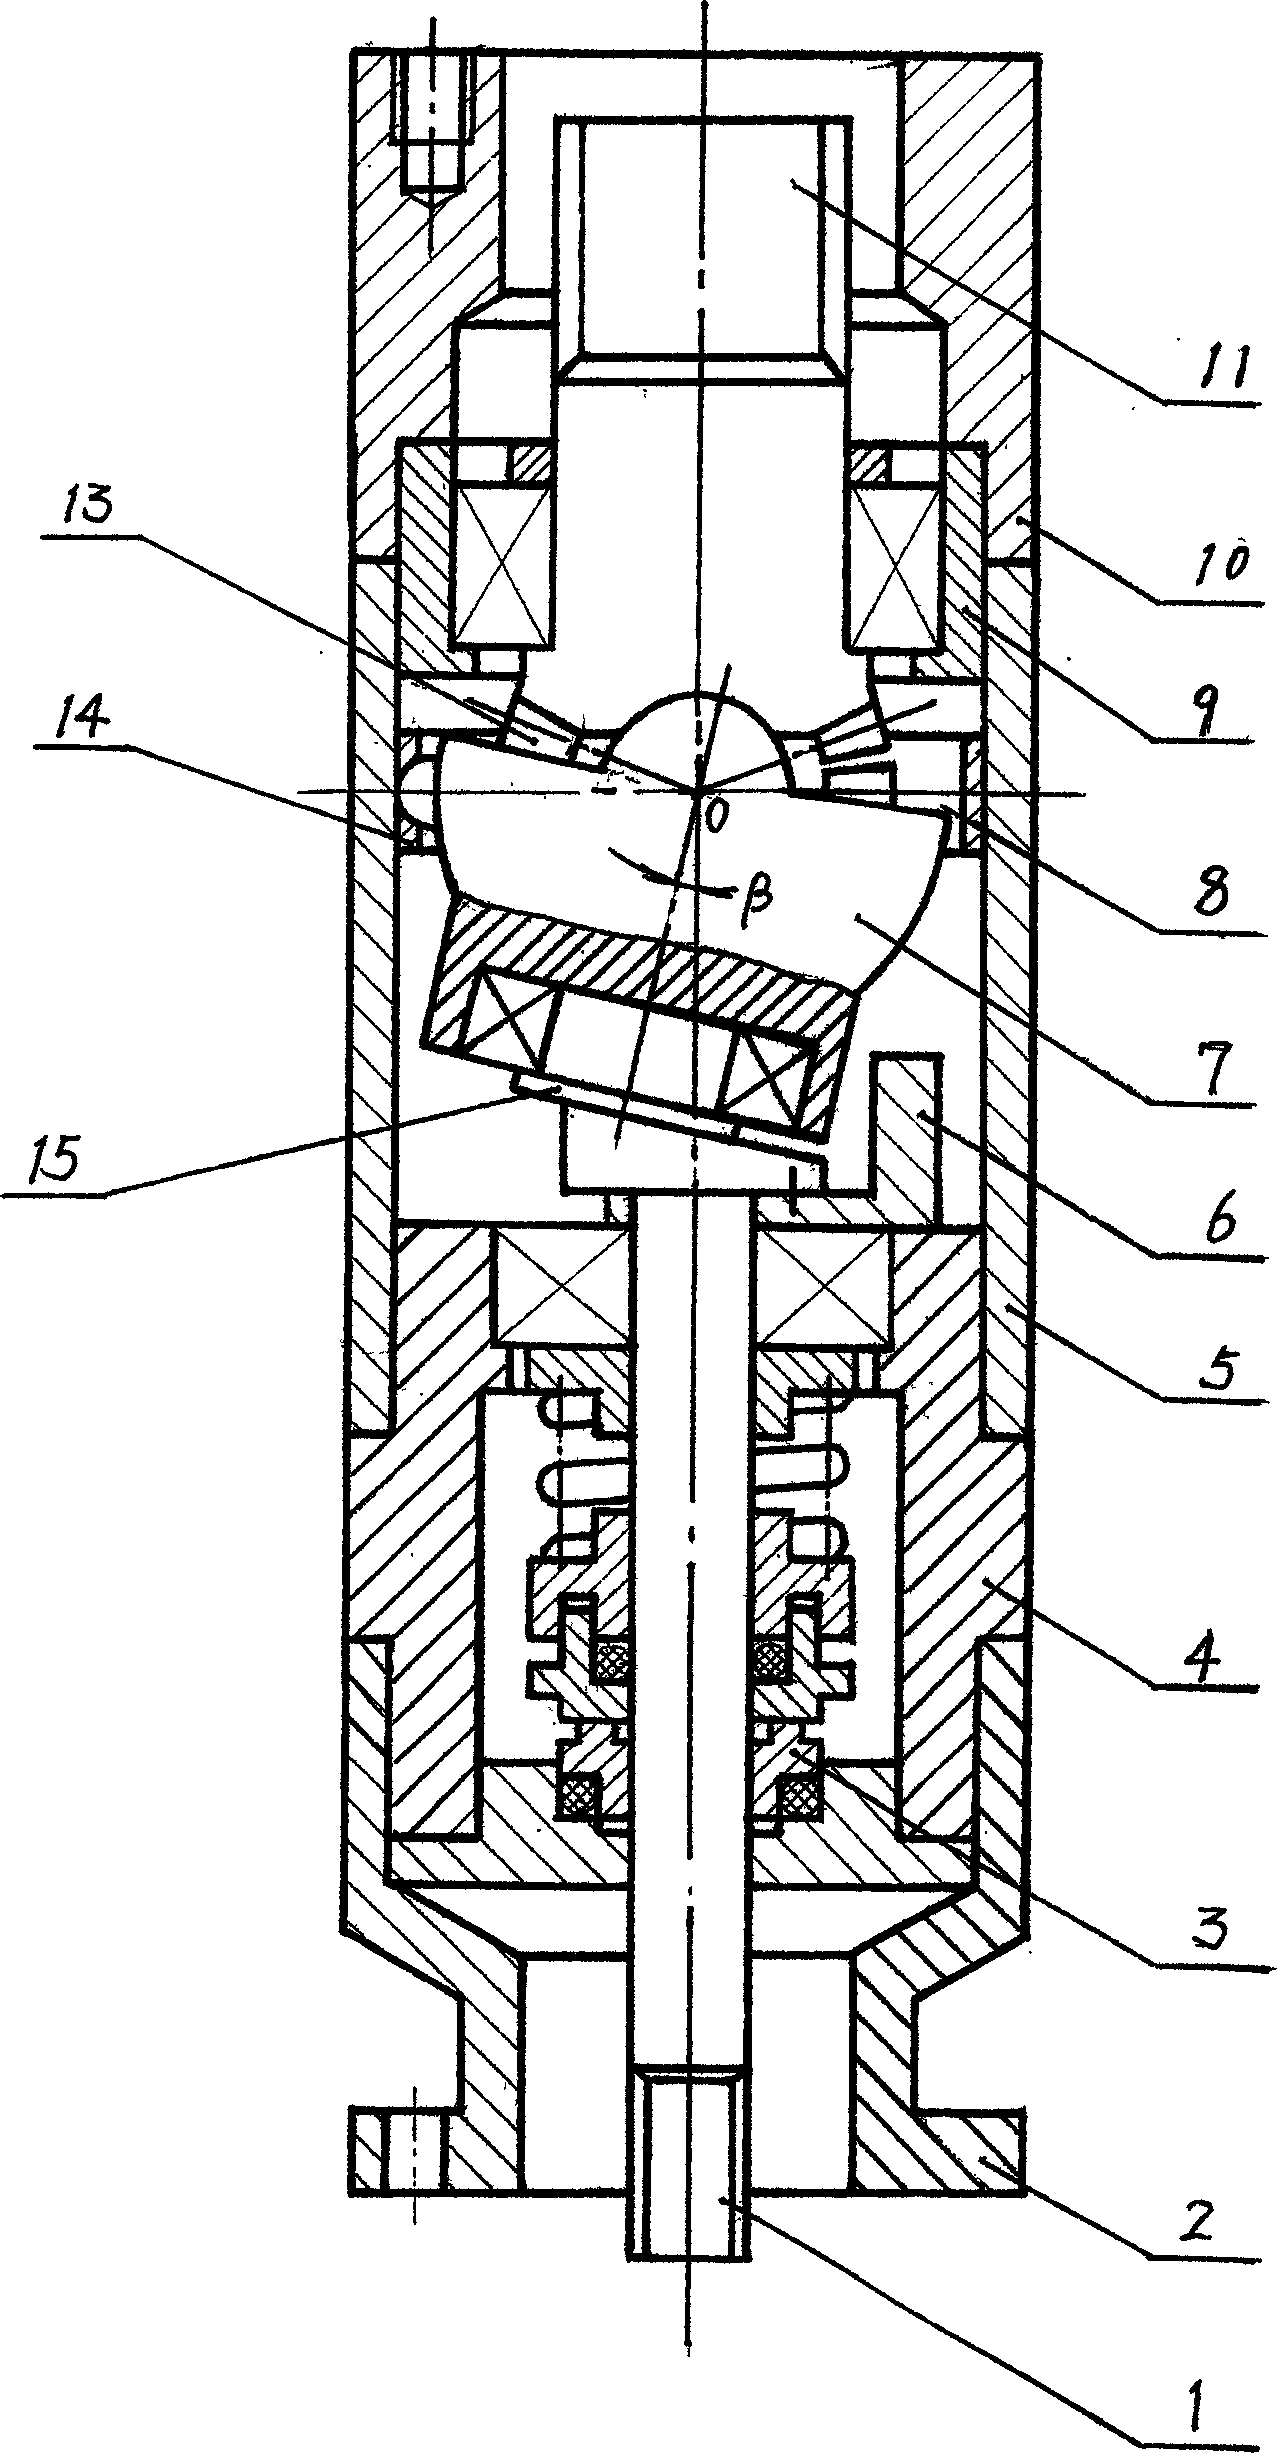 Potential oil screw pump production system